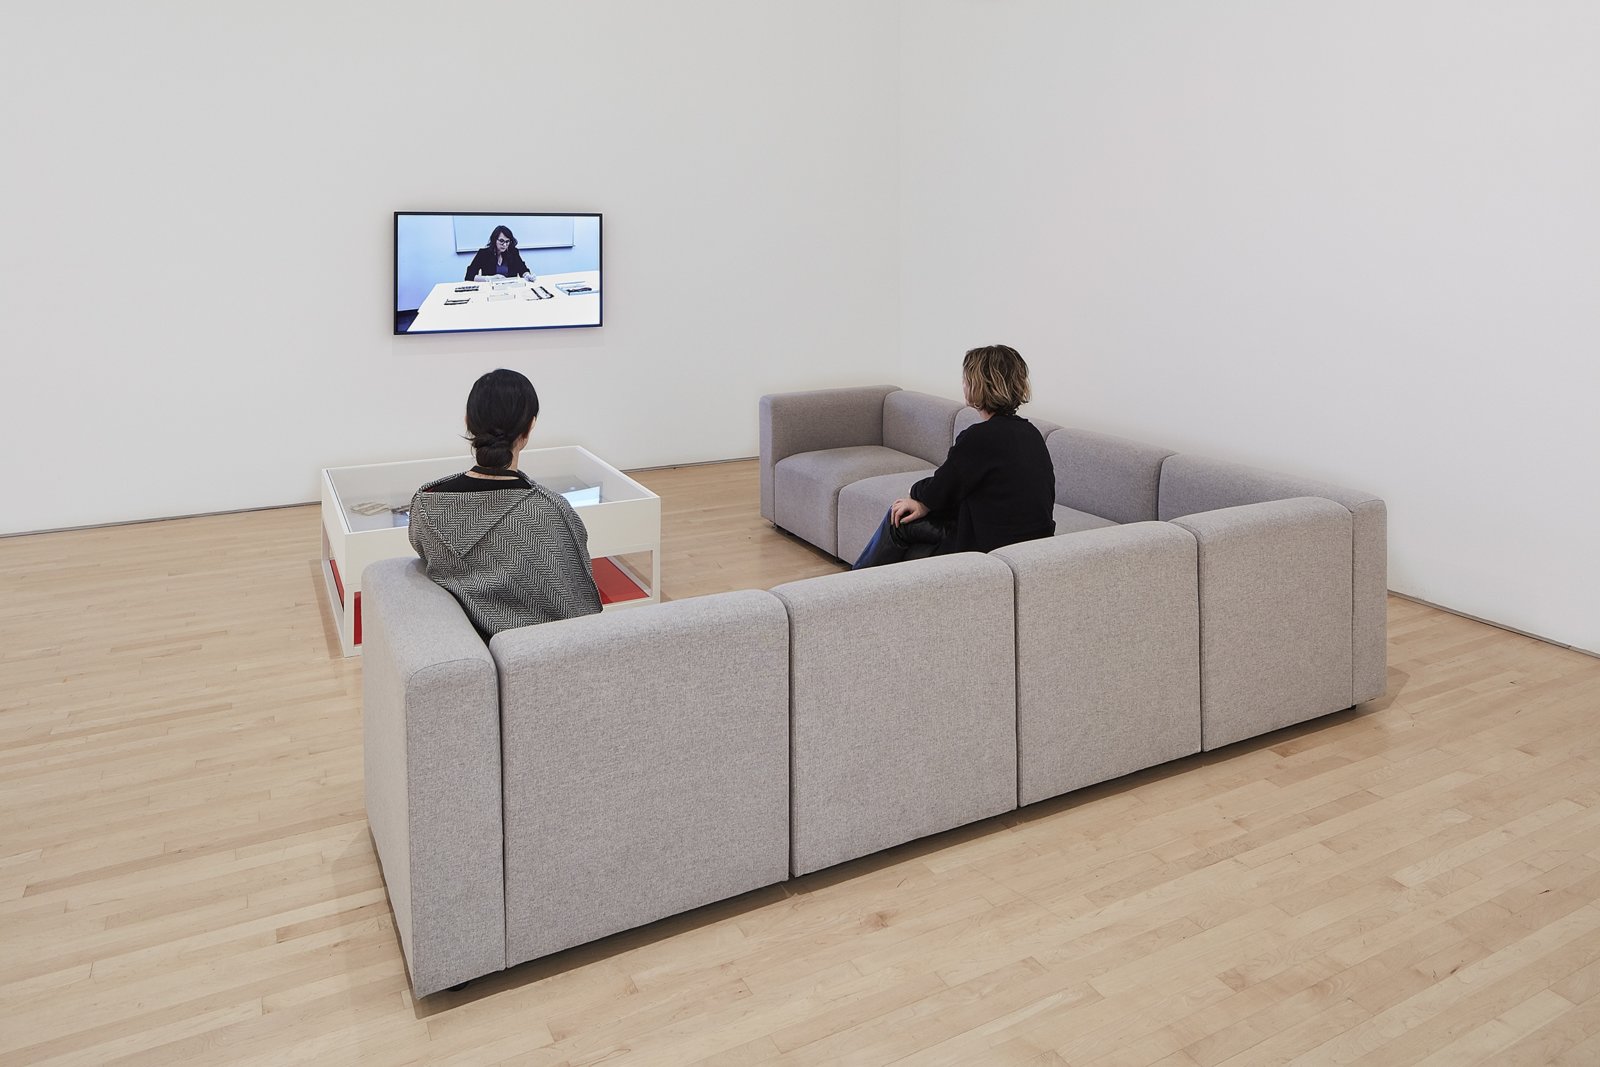 Tanya Lukin Linklater, An amplification through many minds, 2019, video, 36 minutes, 32 seconds. Installation view, SOFT POWER, SF MOMA, San Francisco, USA, 2019